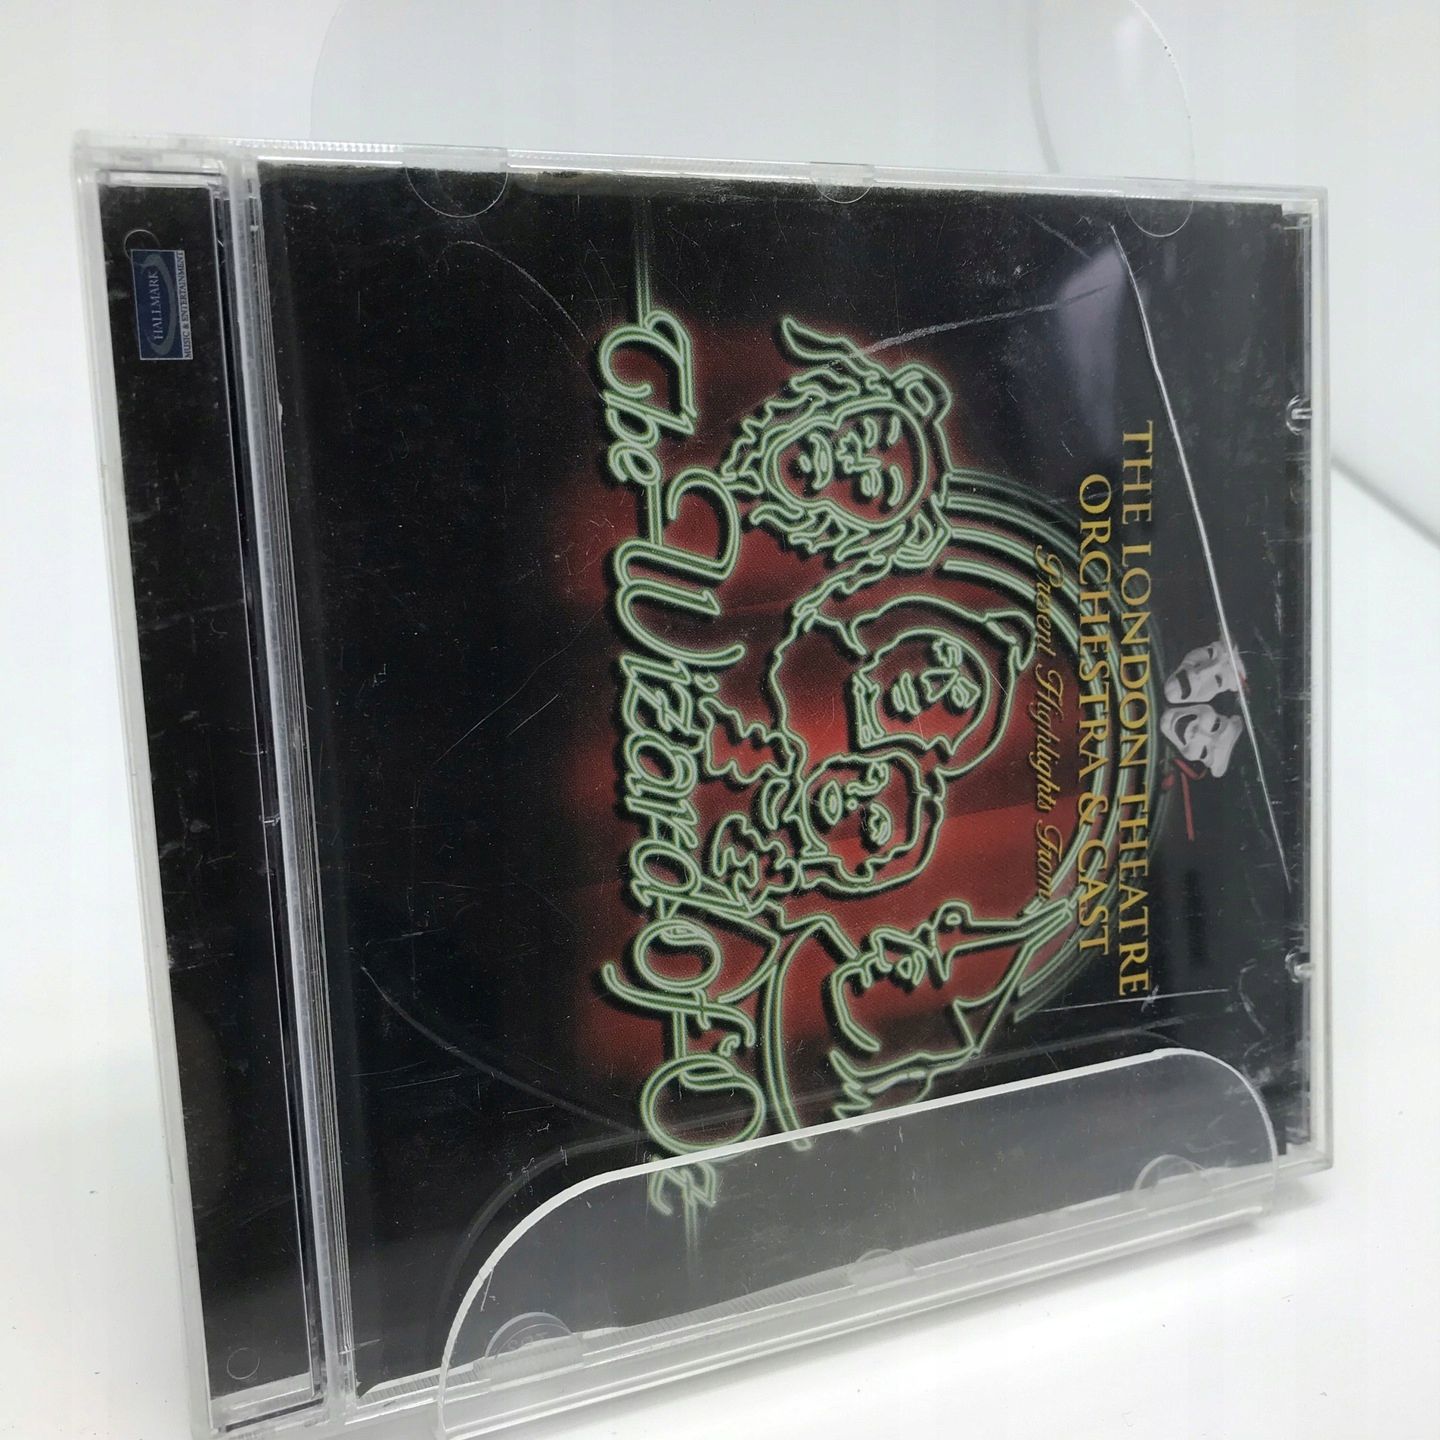 Cd - London Theatre Orchestra - The Wizard Of Oz